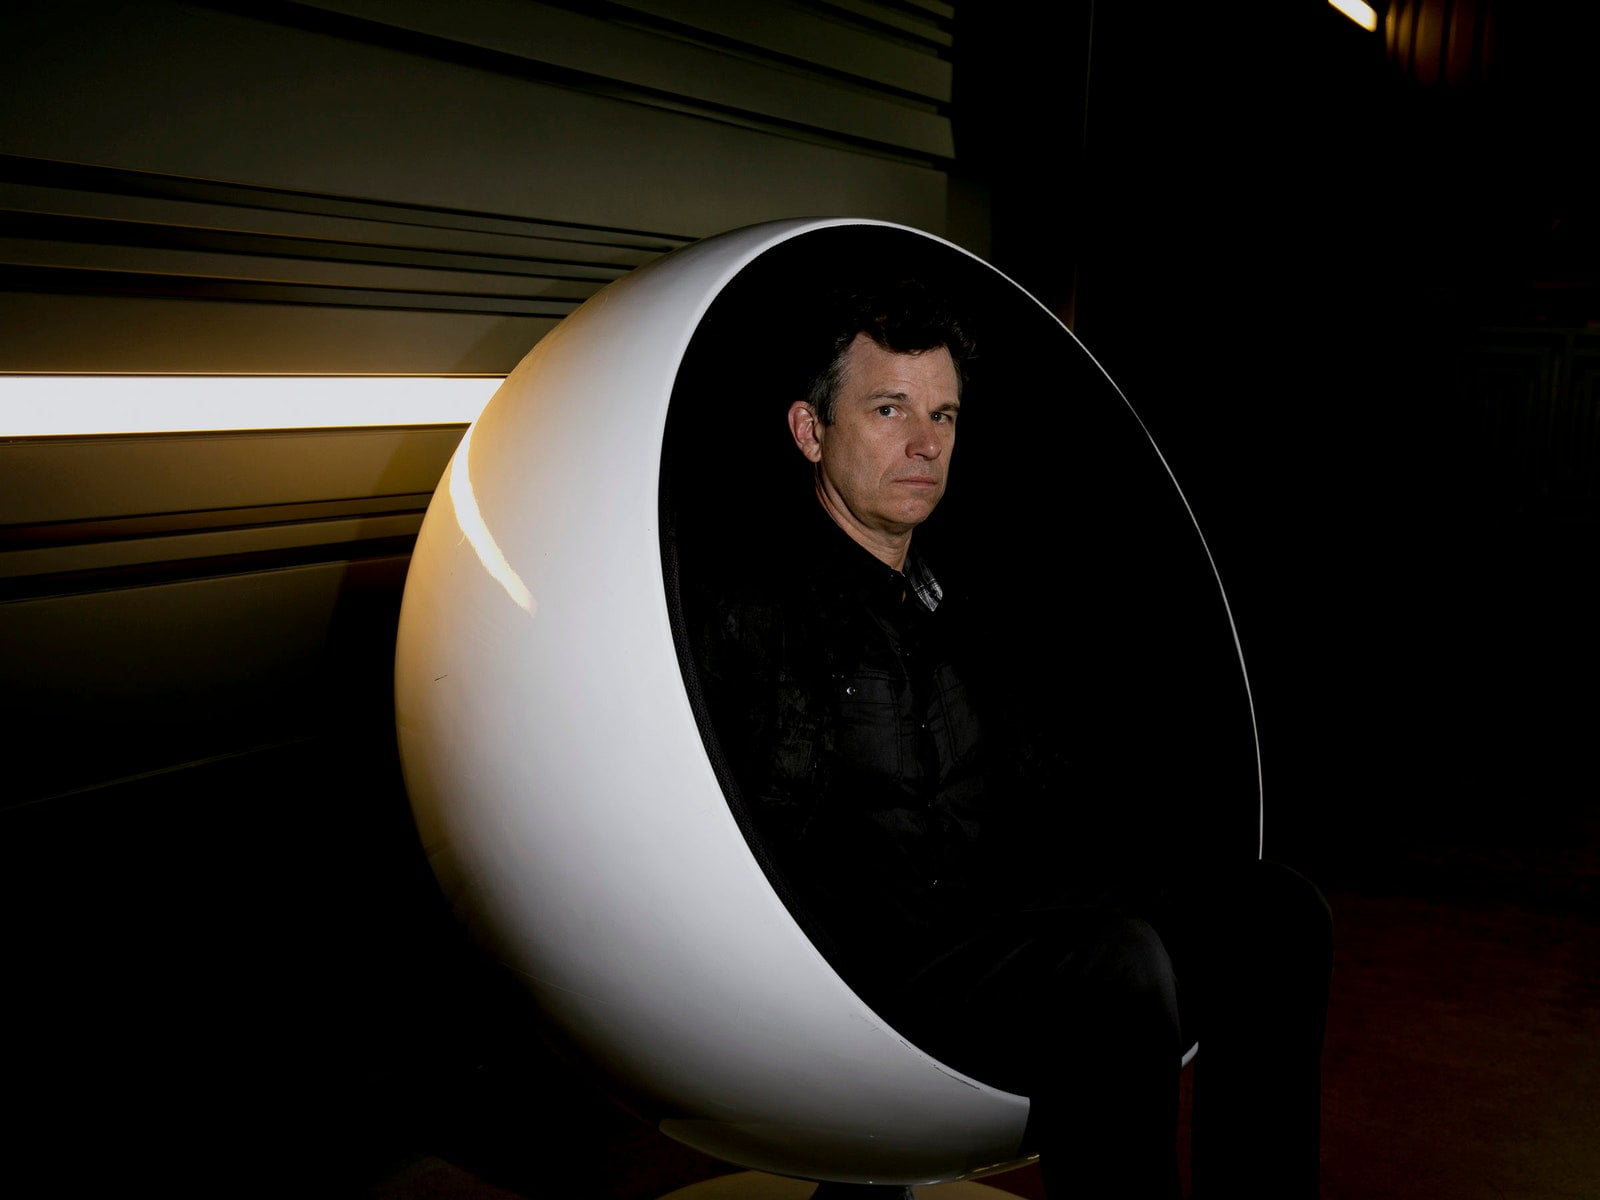 Person sitting in white egg chair against a black wall with light beams